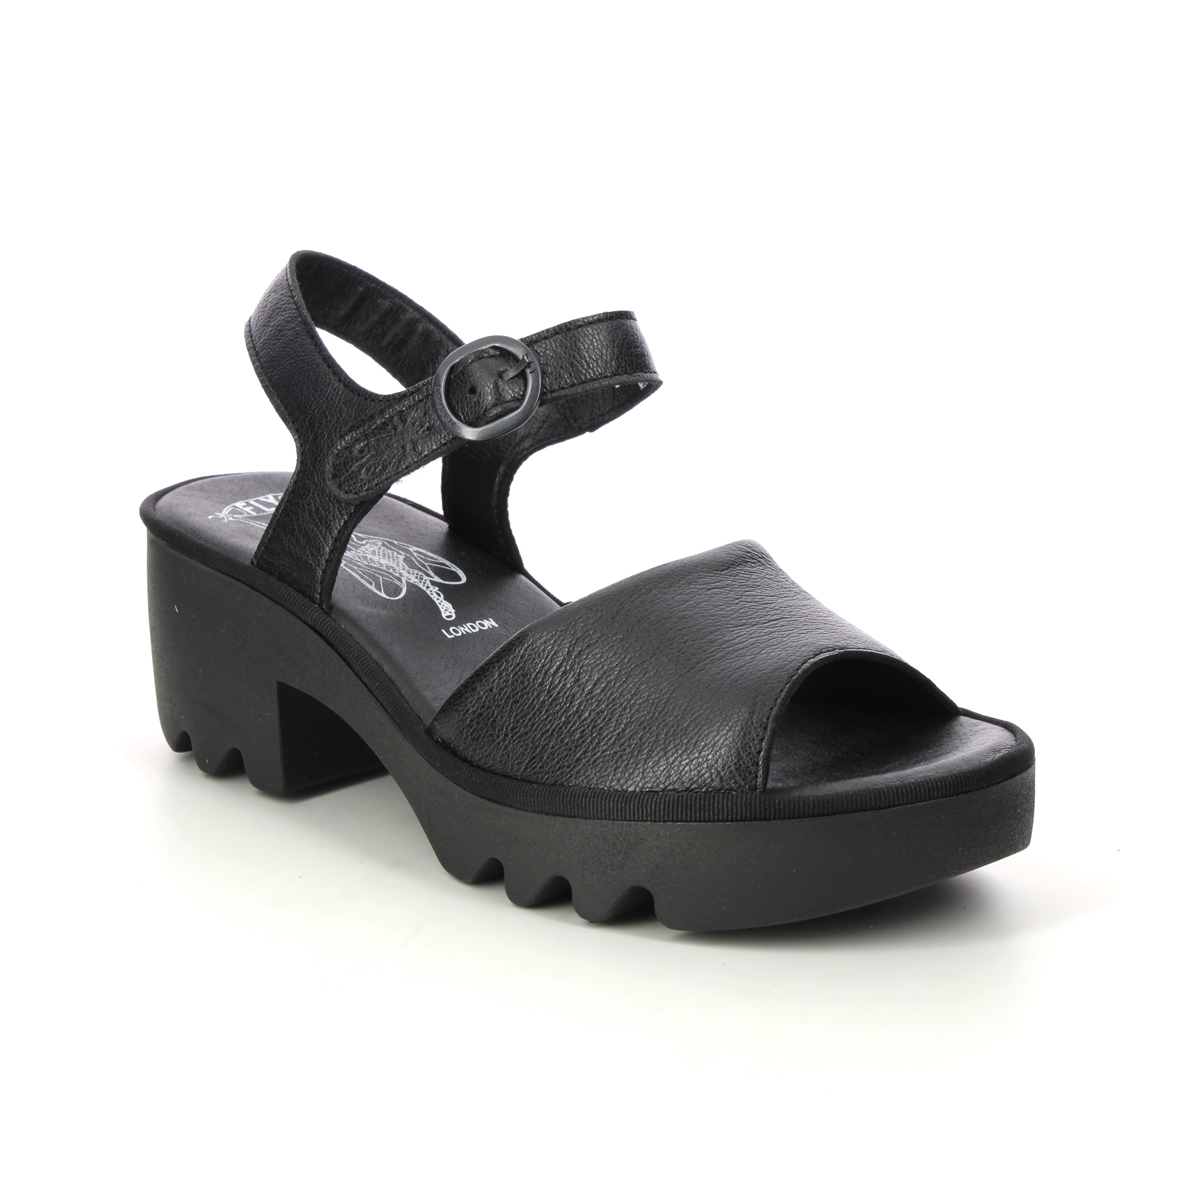 Fly London Tull Thalia Black leather Womens Wedge Sandals P501503-000 in a Plain Leather and Textile in Size 36